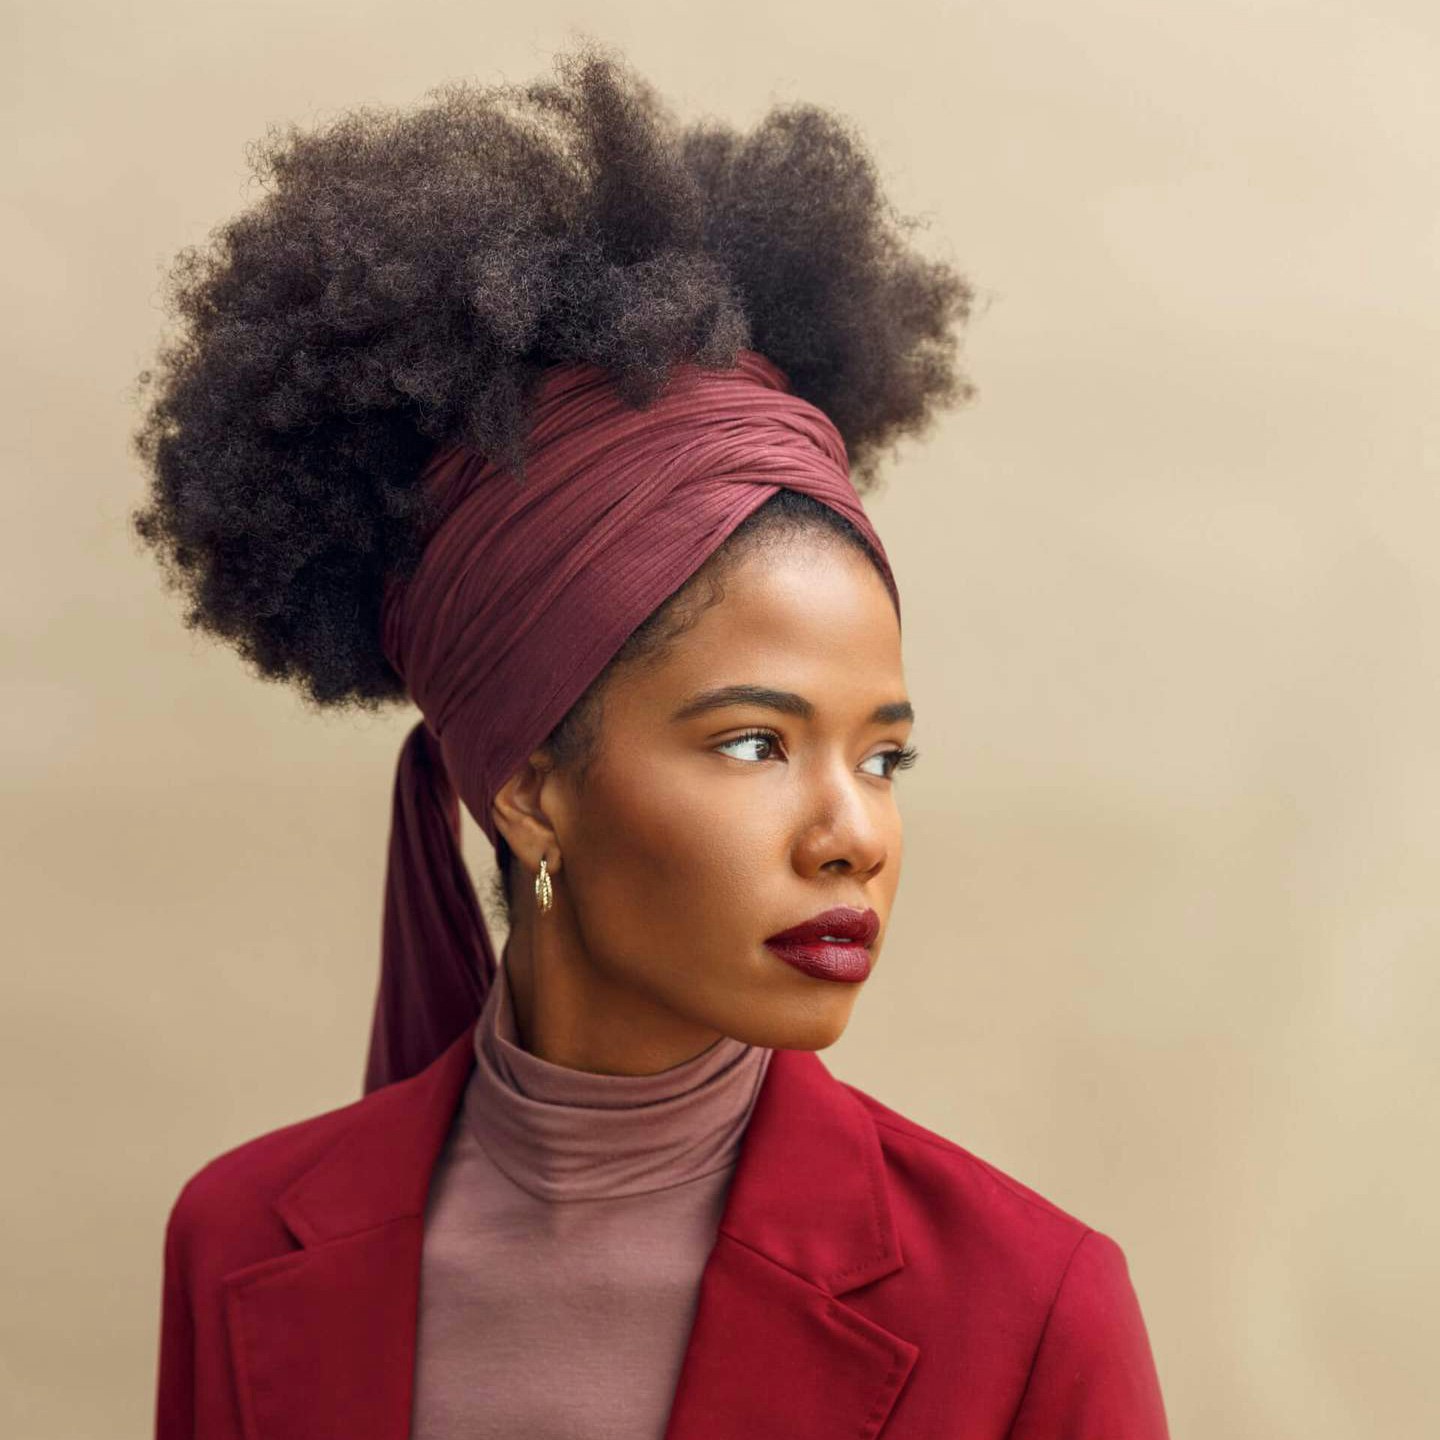 A Black woman with natural hair wearing a bright-red headwrap